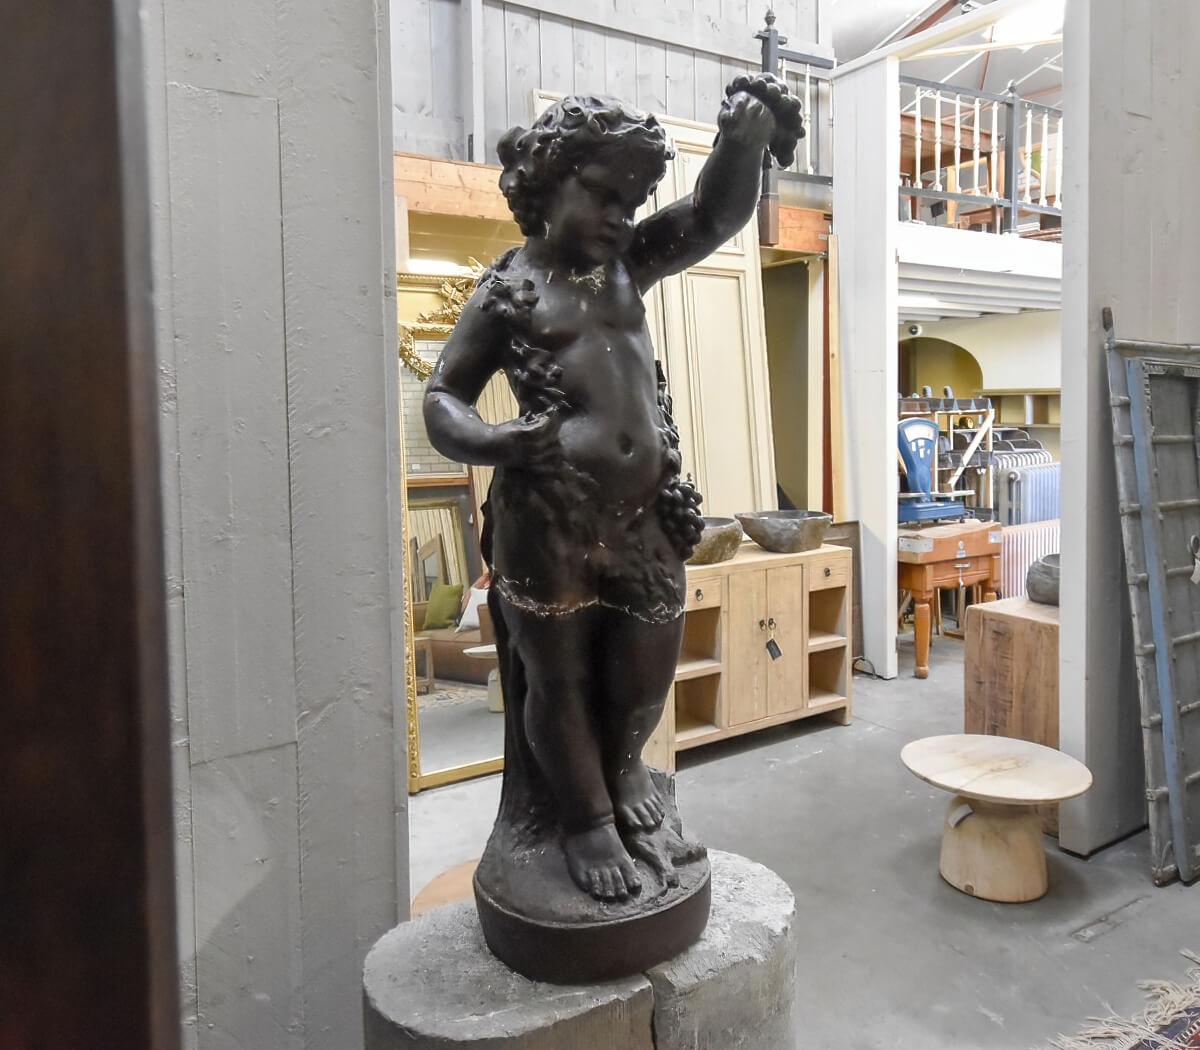 Nice iron statue from a small boy.
Recuperated from a mansion near Brussels.